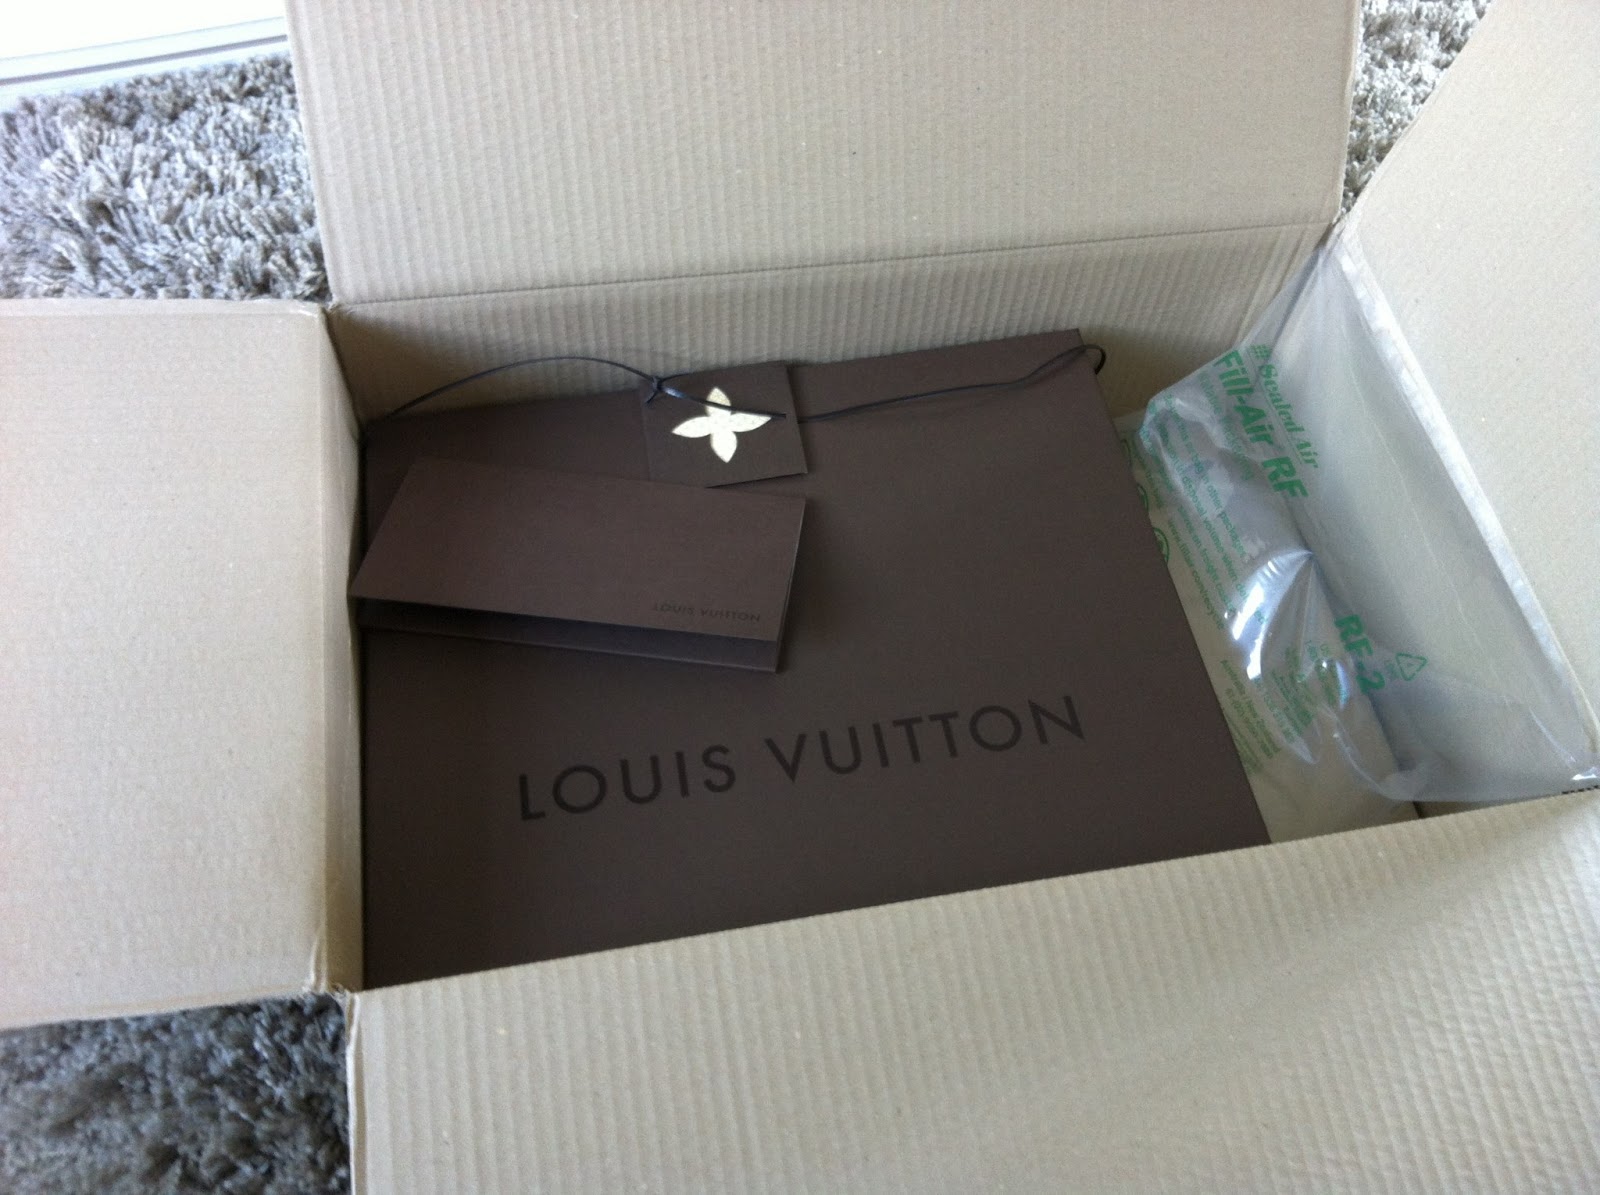 Lady Like Blogger: Bonjour Louis Vuitton! Review and unboxing